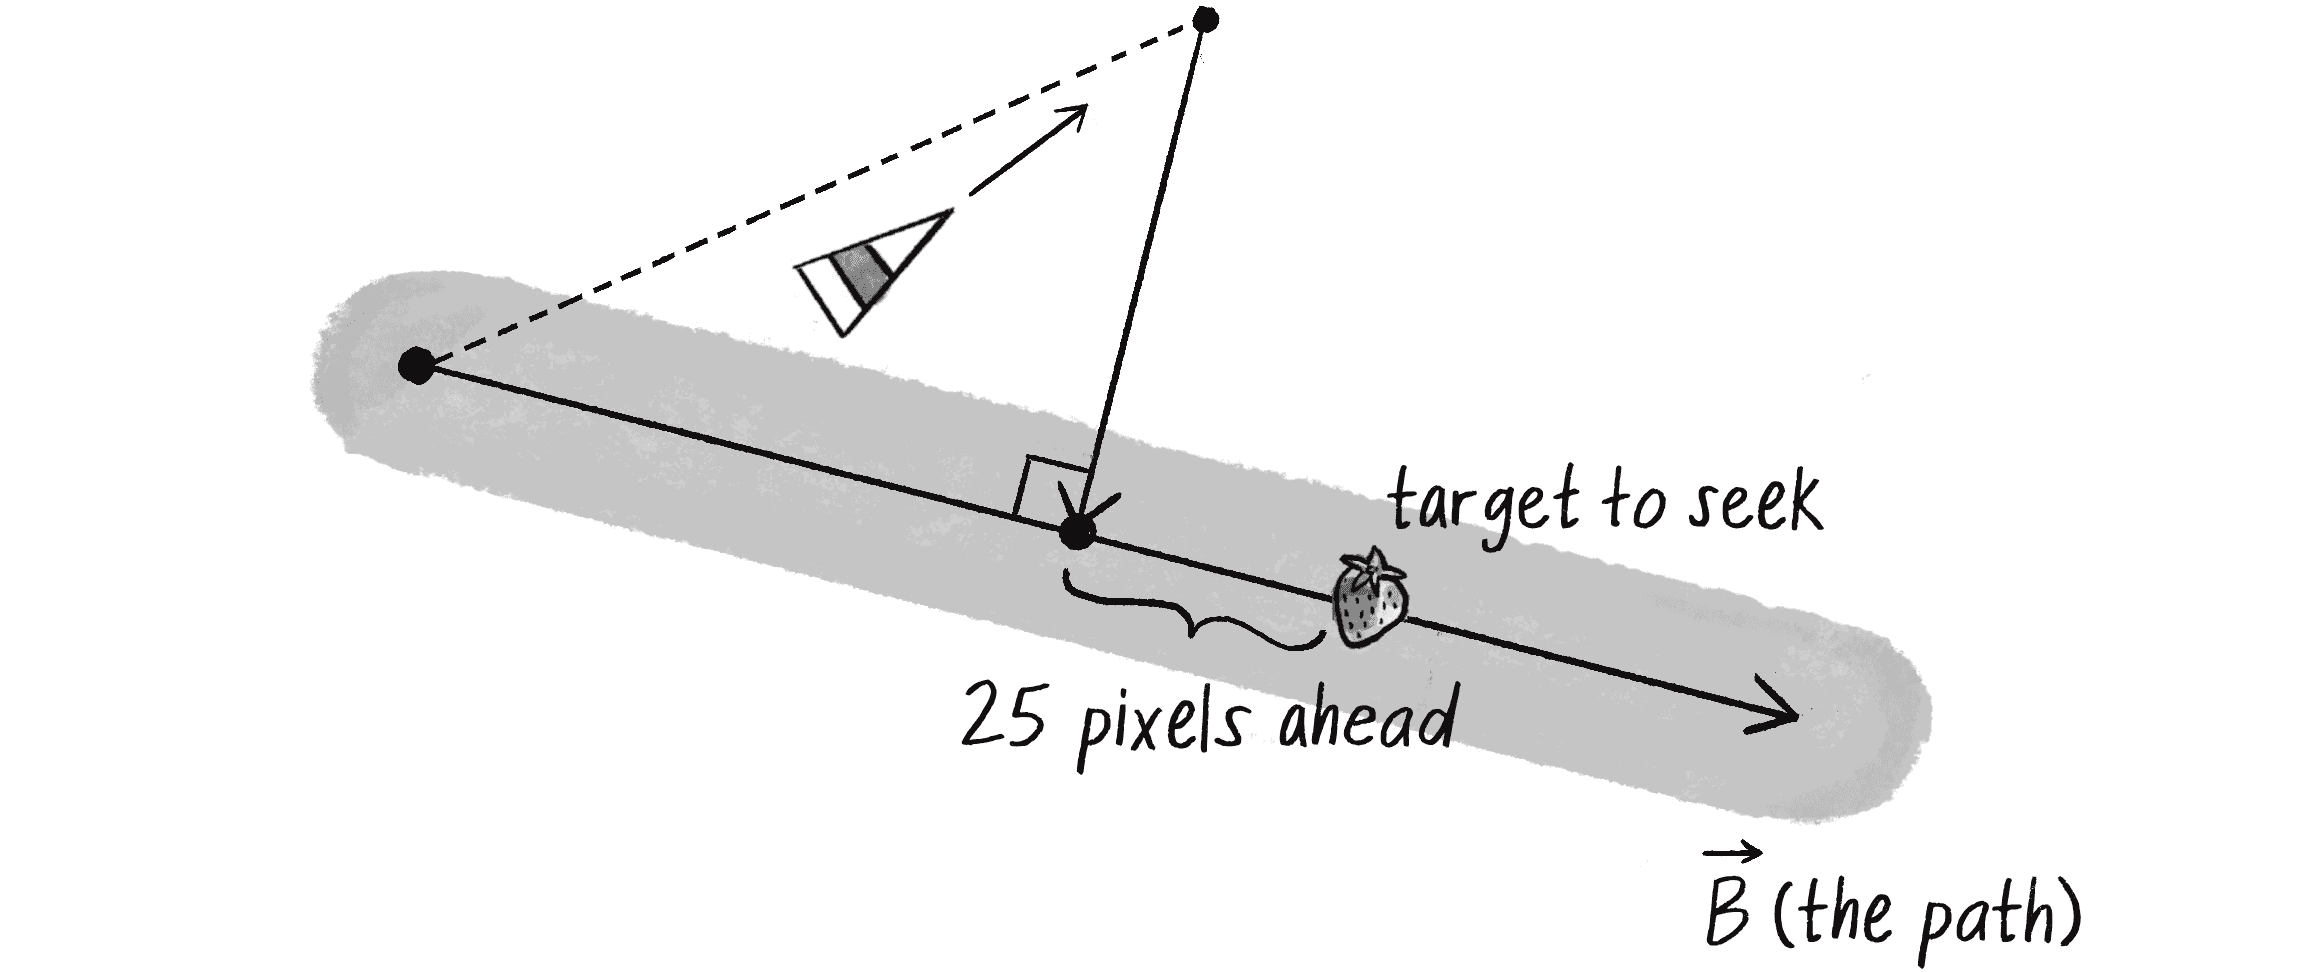 Figure 5.27: The target is 25 pixels (an arbitrary choice) ahead of the normal point along the path.